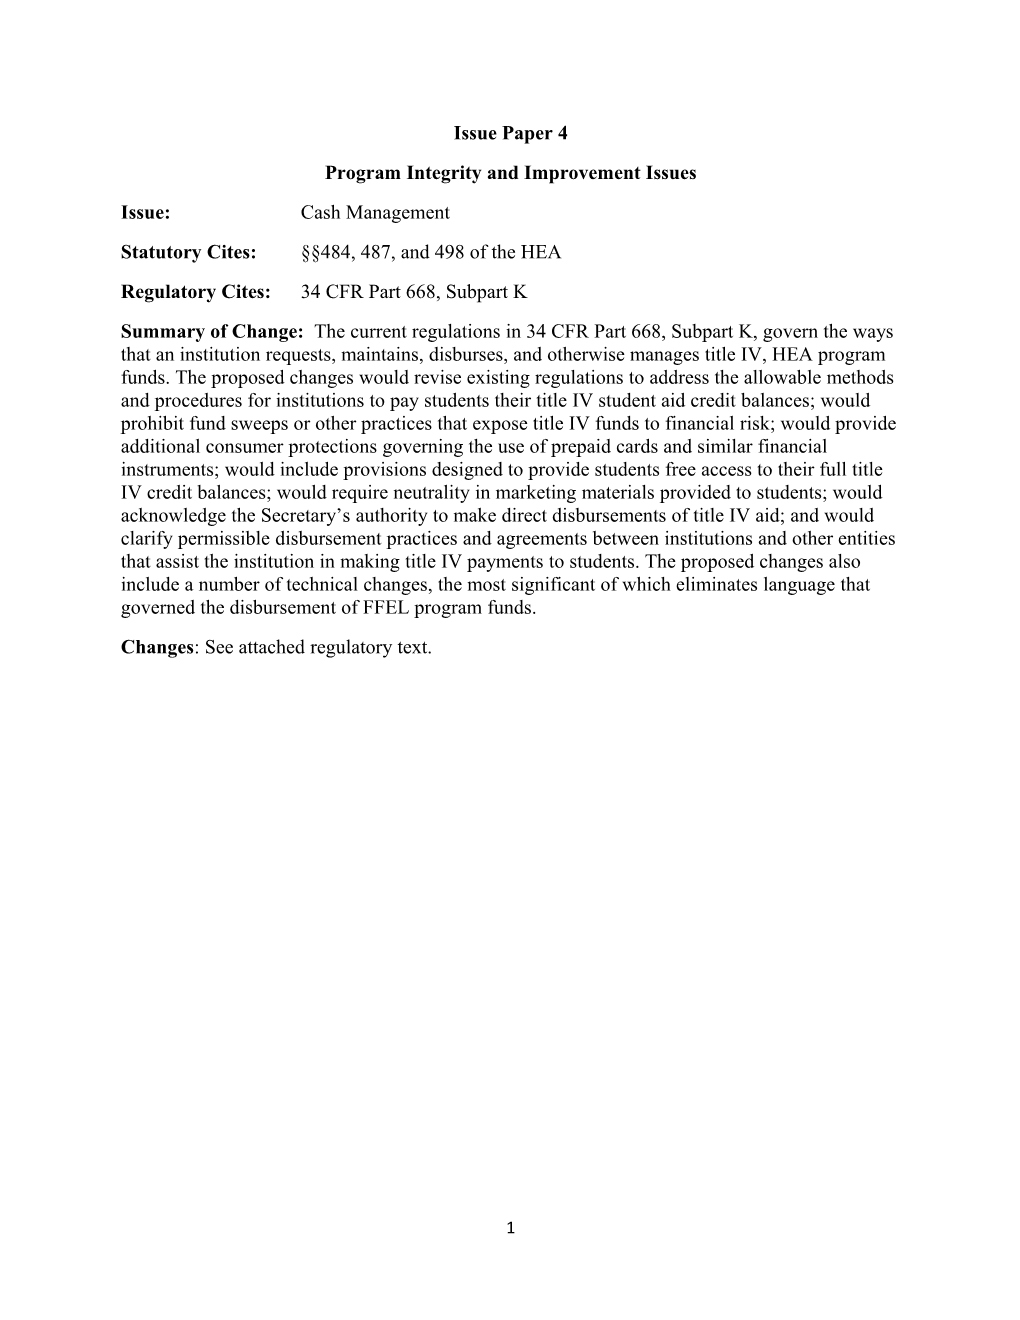 Negotiated Rulemaking for Higher Education 2012-2014: PII Session 3 - Draft Language Of